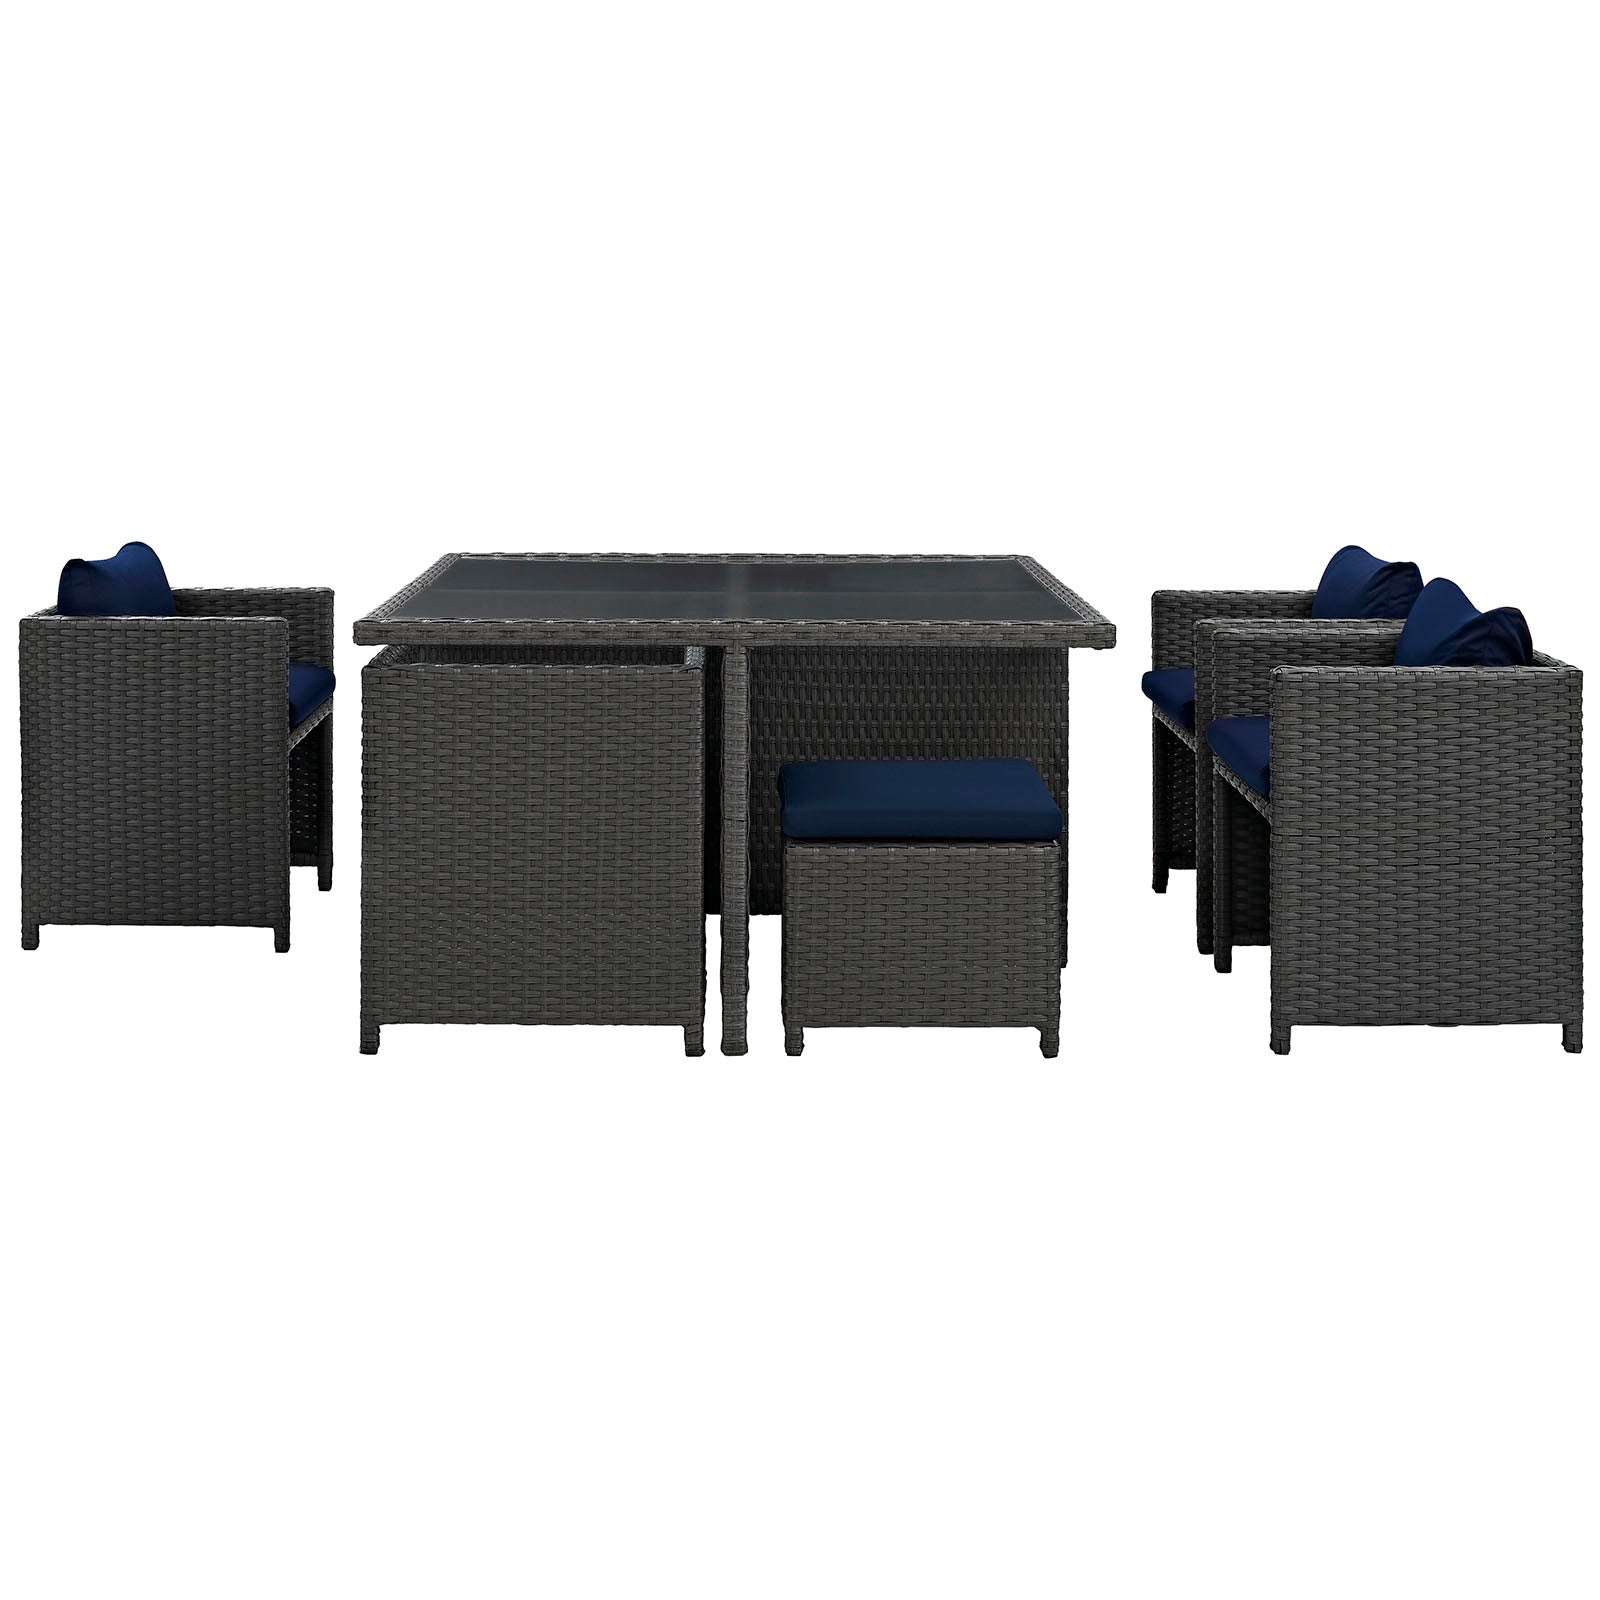 Modway Outdoor Dining Sets - Sojourn 9 Piece Outdoor Patio Dining Set Canvas Navy